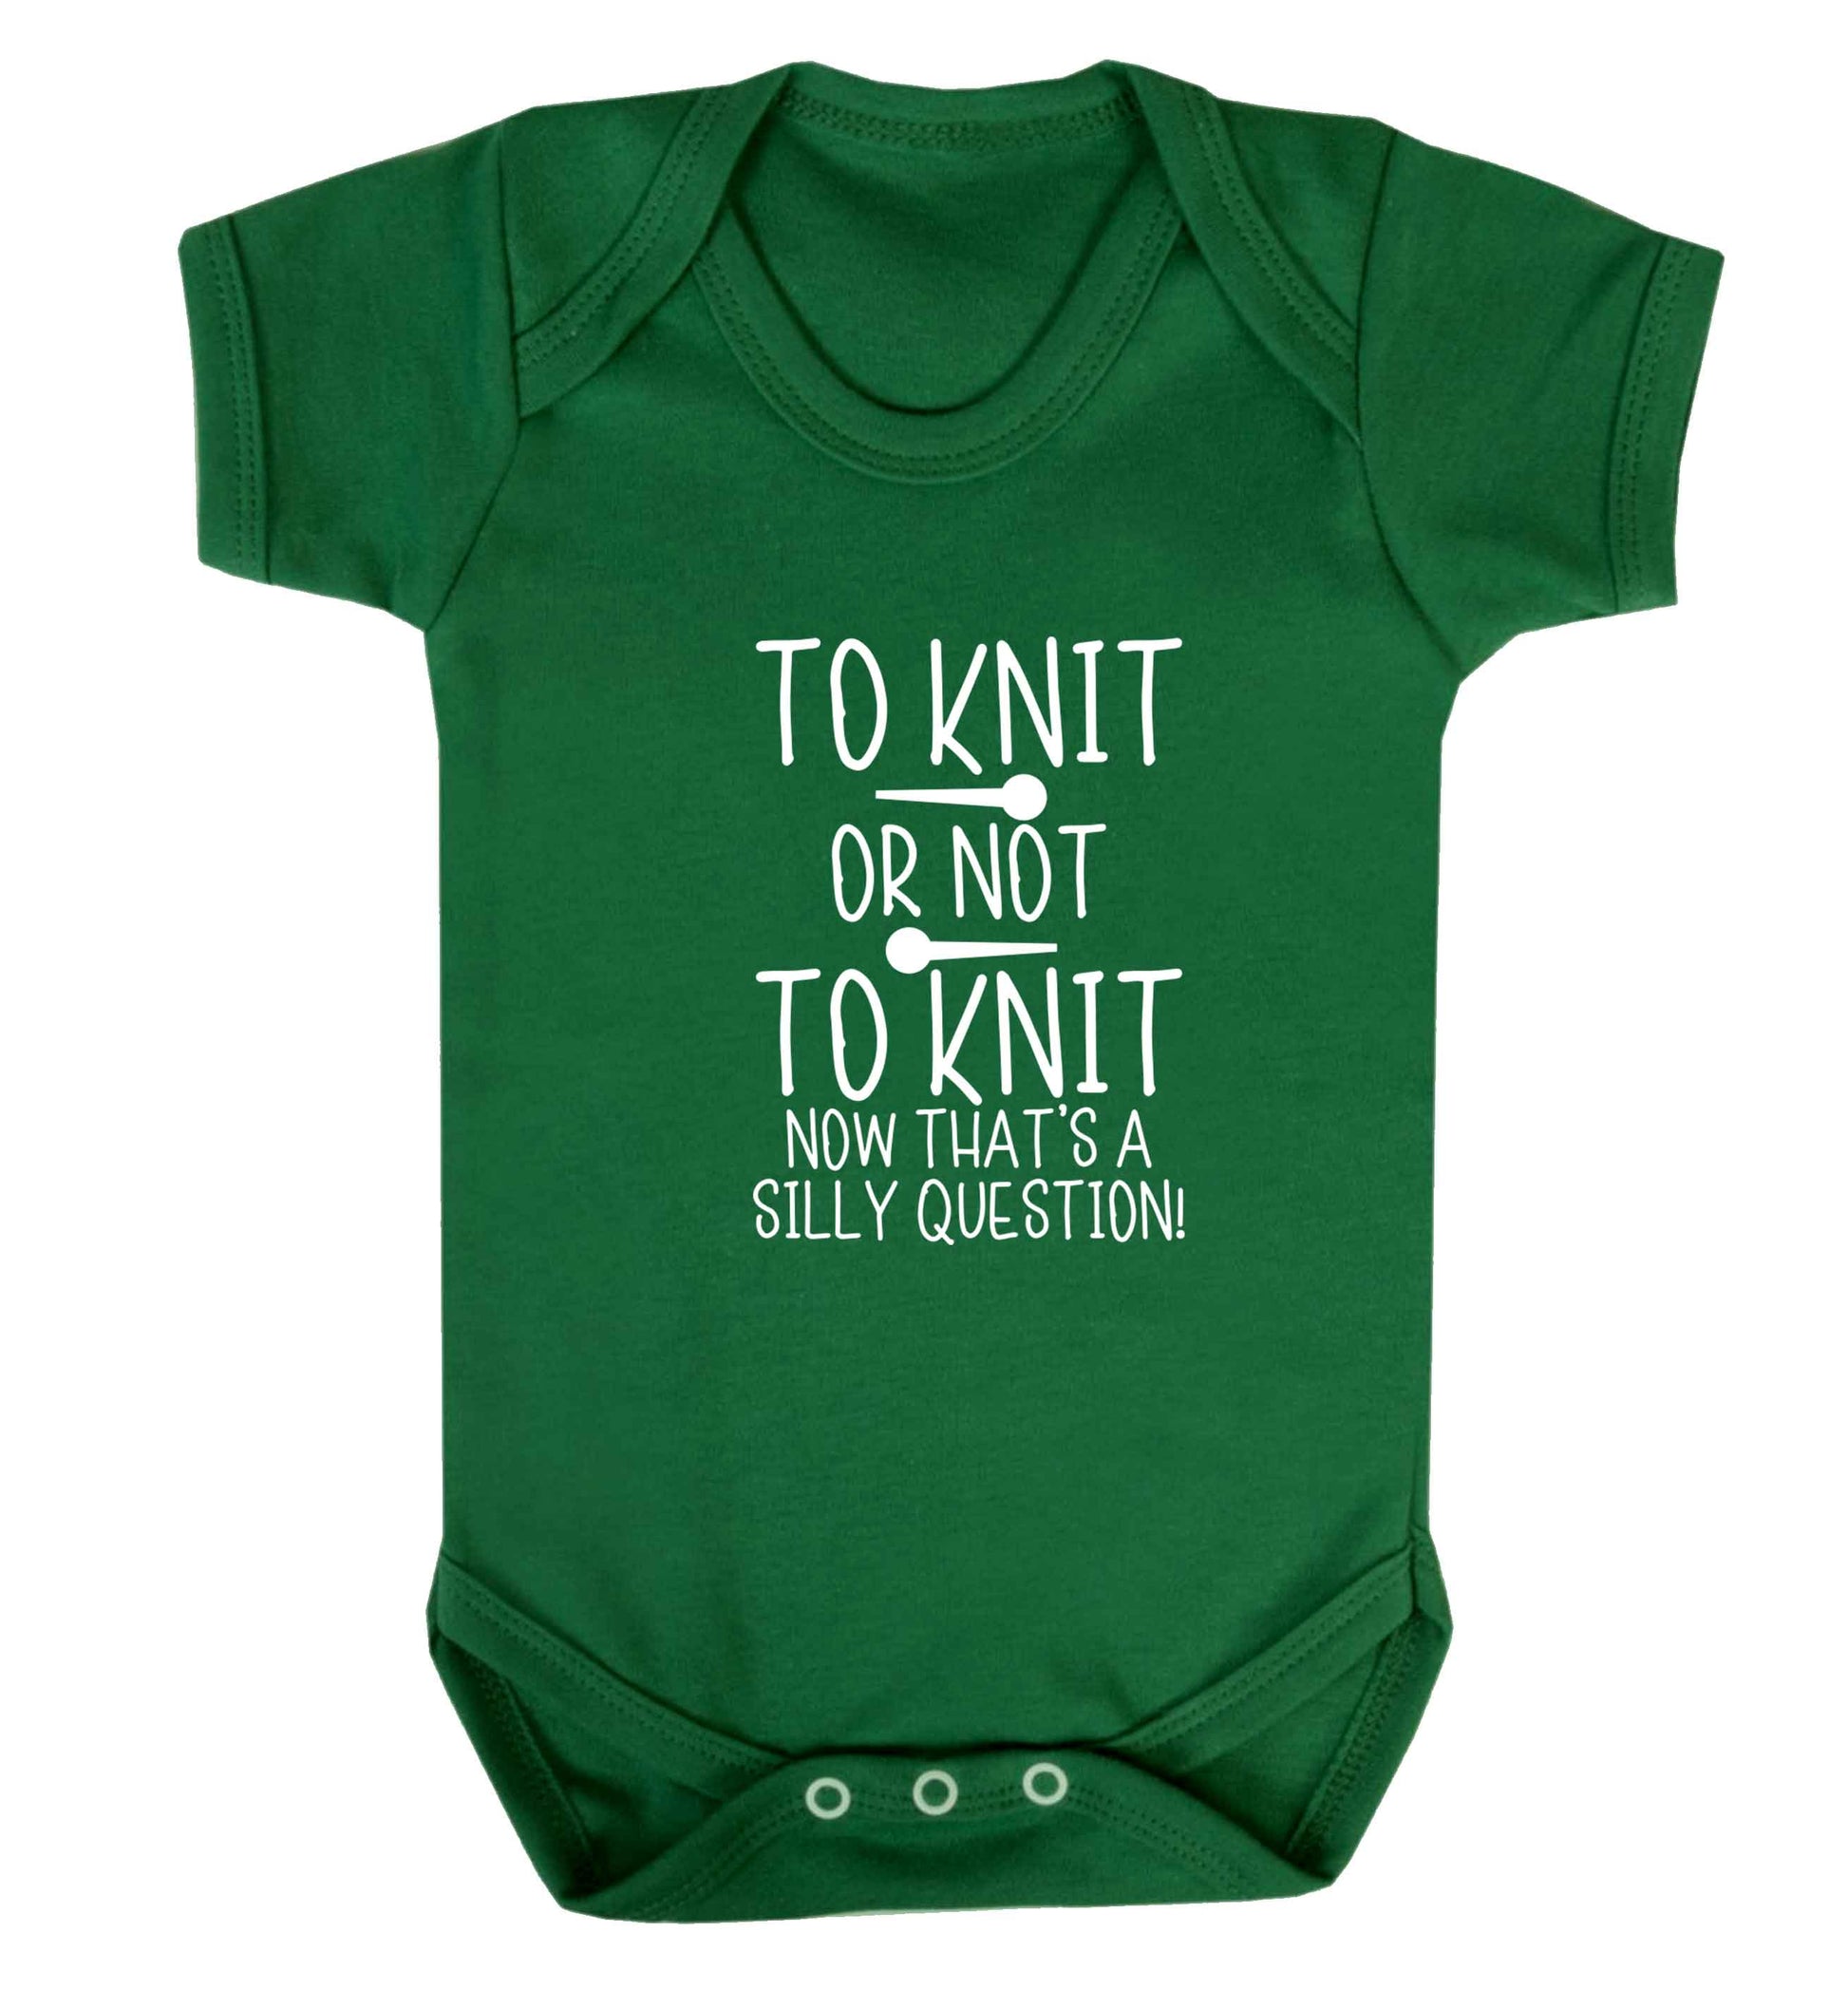 To knit or not to knit now that's a silly question baby vest green 18-24 months